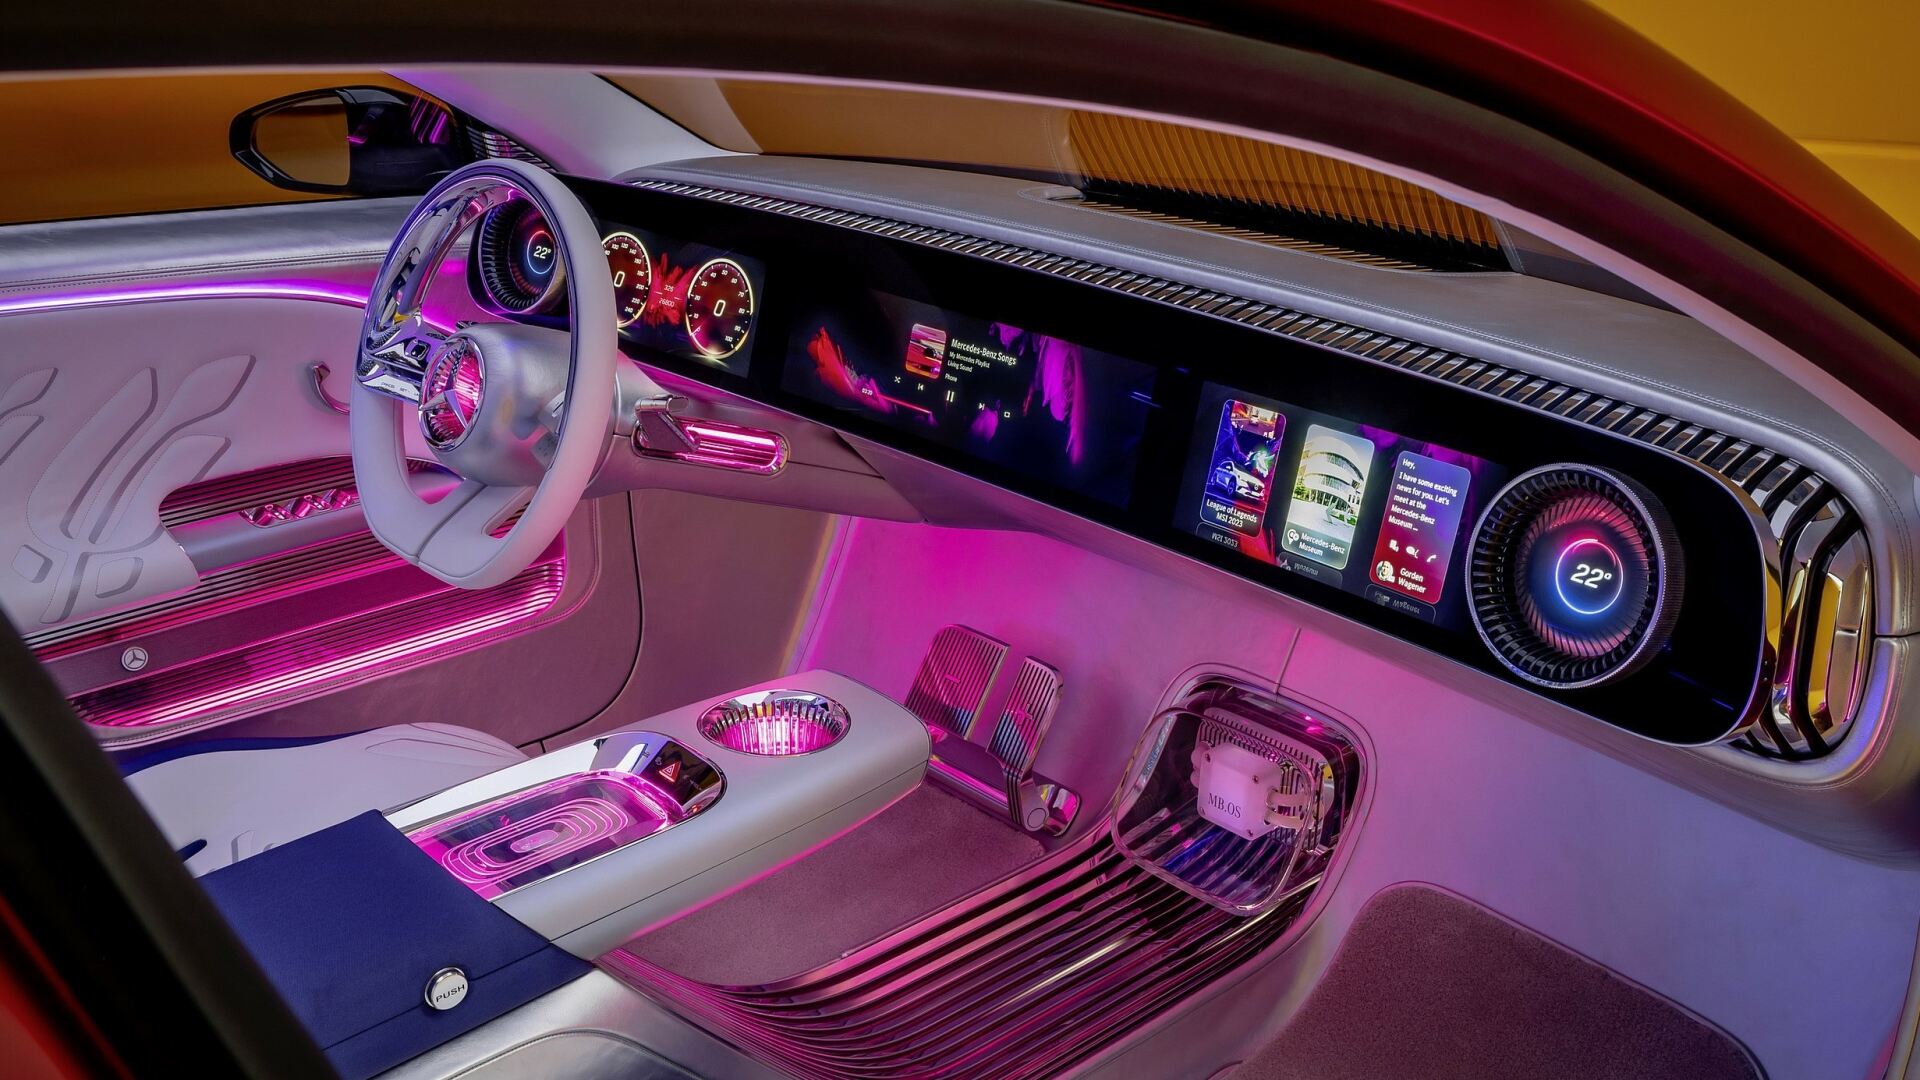 The Interior, Steering, Dashboard, And Central Console Of A Mercedes-Benz Concept CLA Class (Credits Mercedes-Benz Media Newsroom USA )